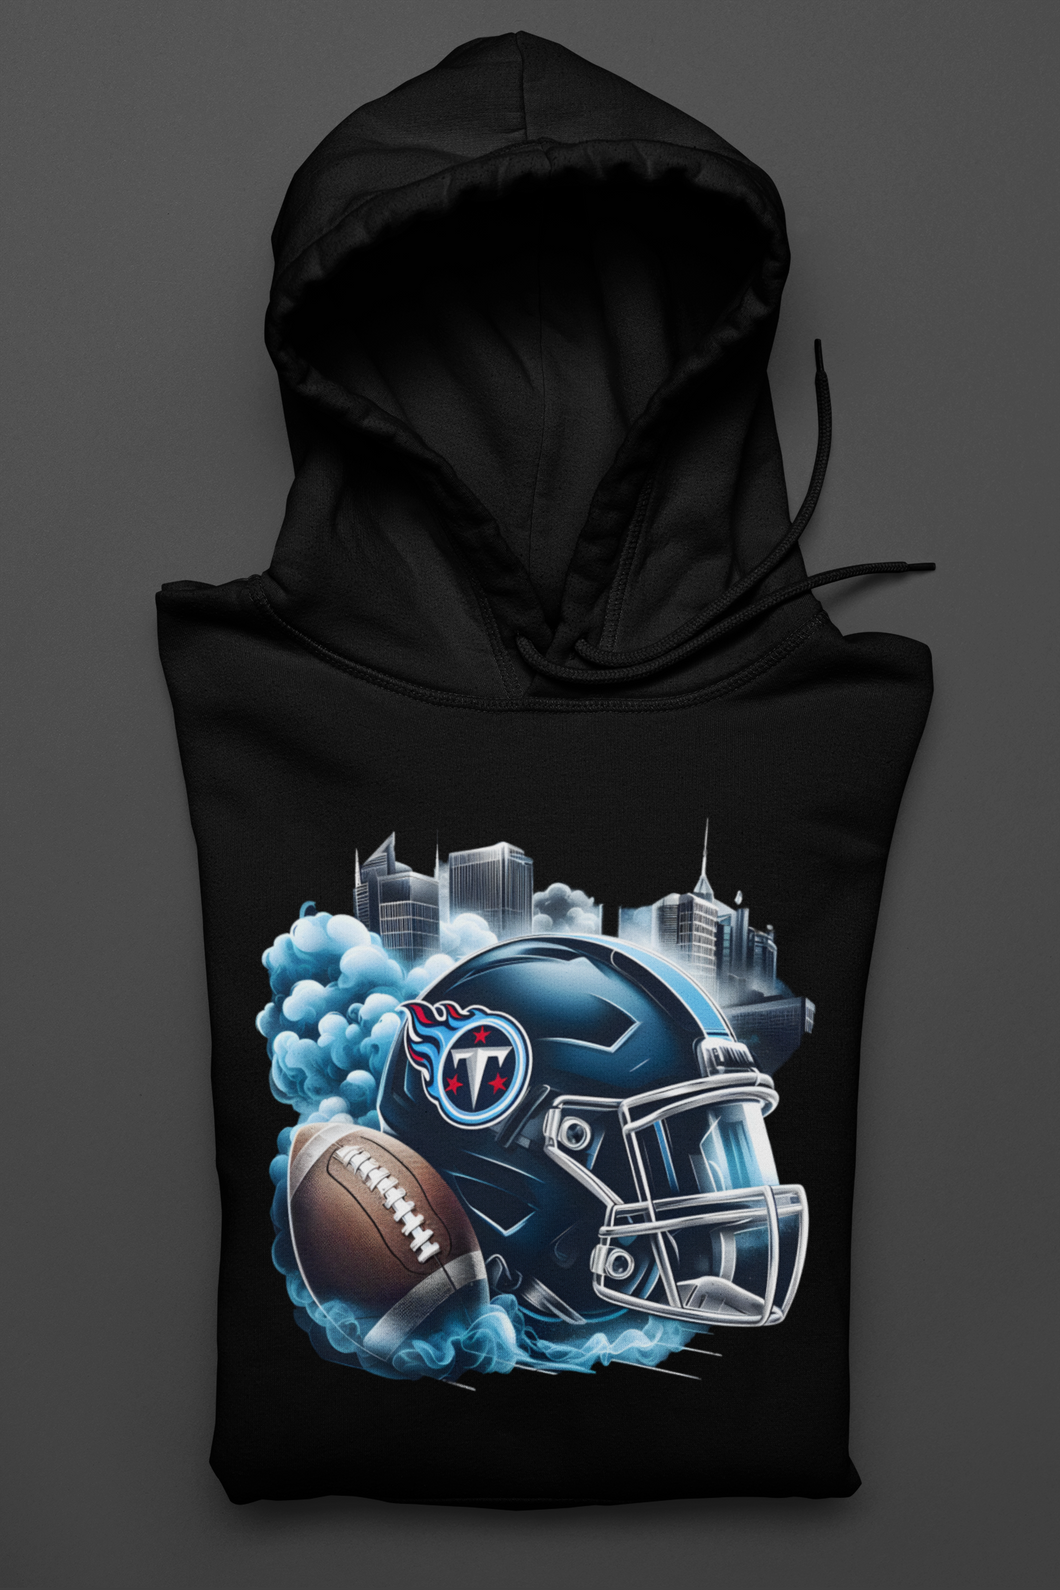 The Tennessee Titans Shirt/Hoody